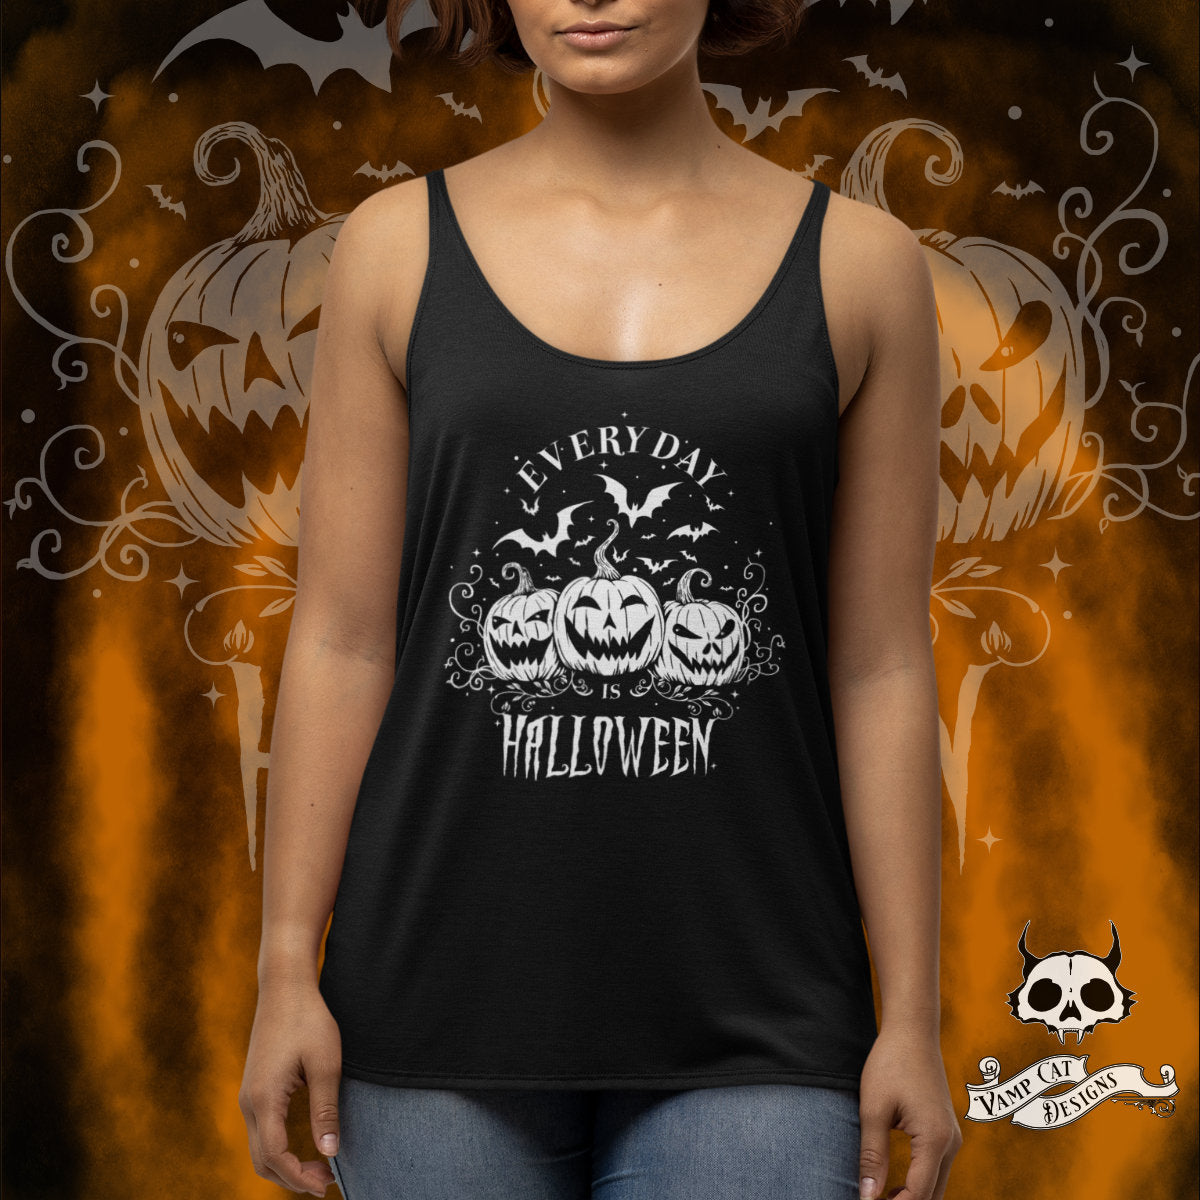 Everyday Is Halloween-Tank Top-Racer Back-Jack O' Lanterns And Bats-Halloween Shirt-Witchy-Halloween Apparel-Women's Top-Gothic